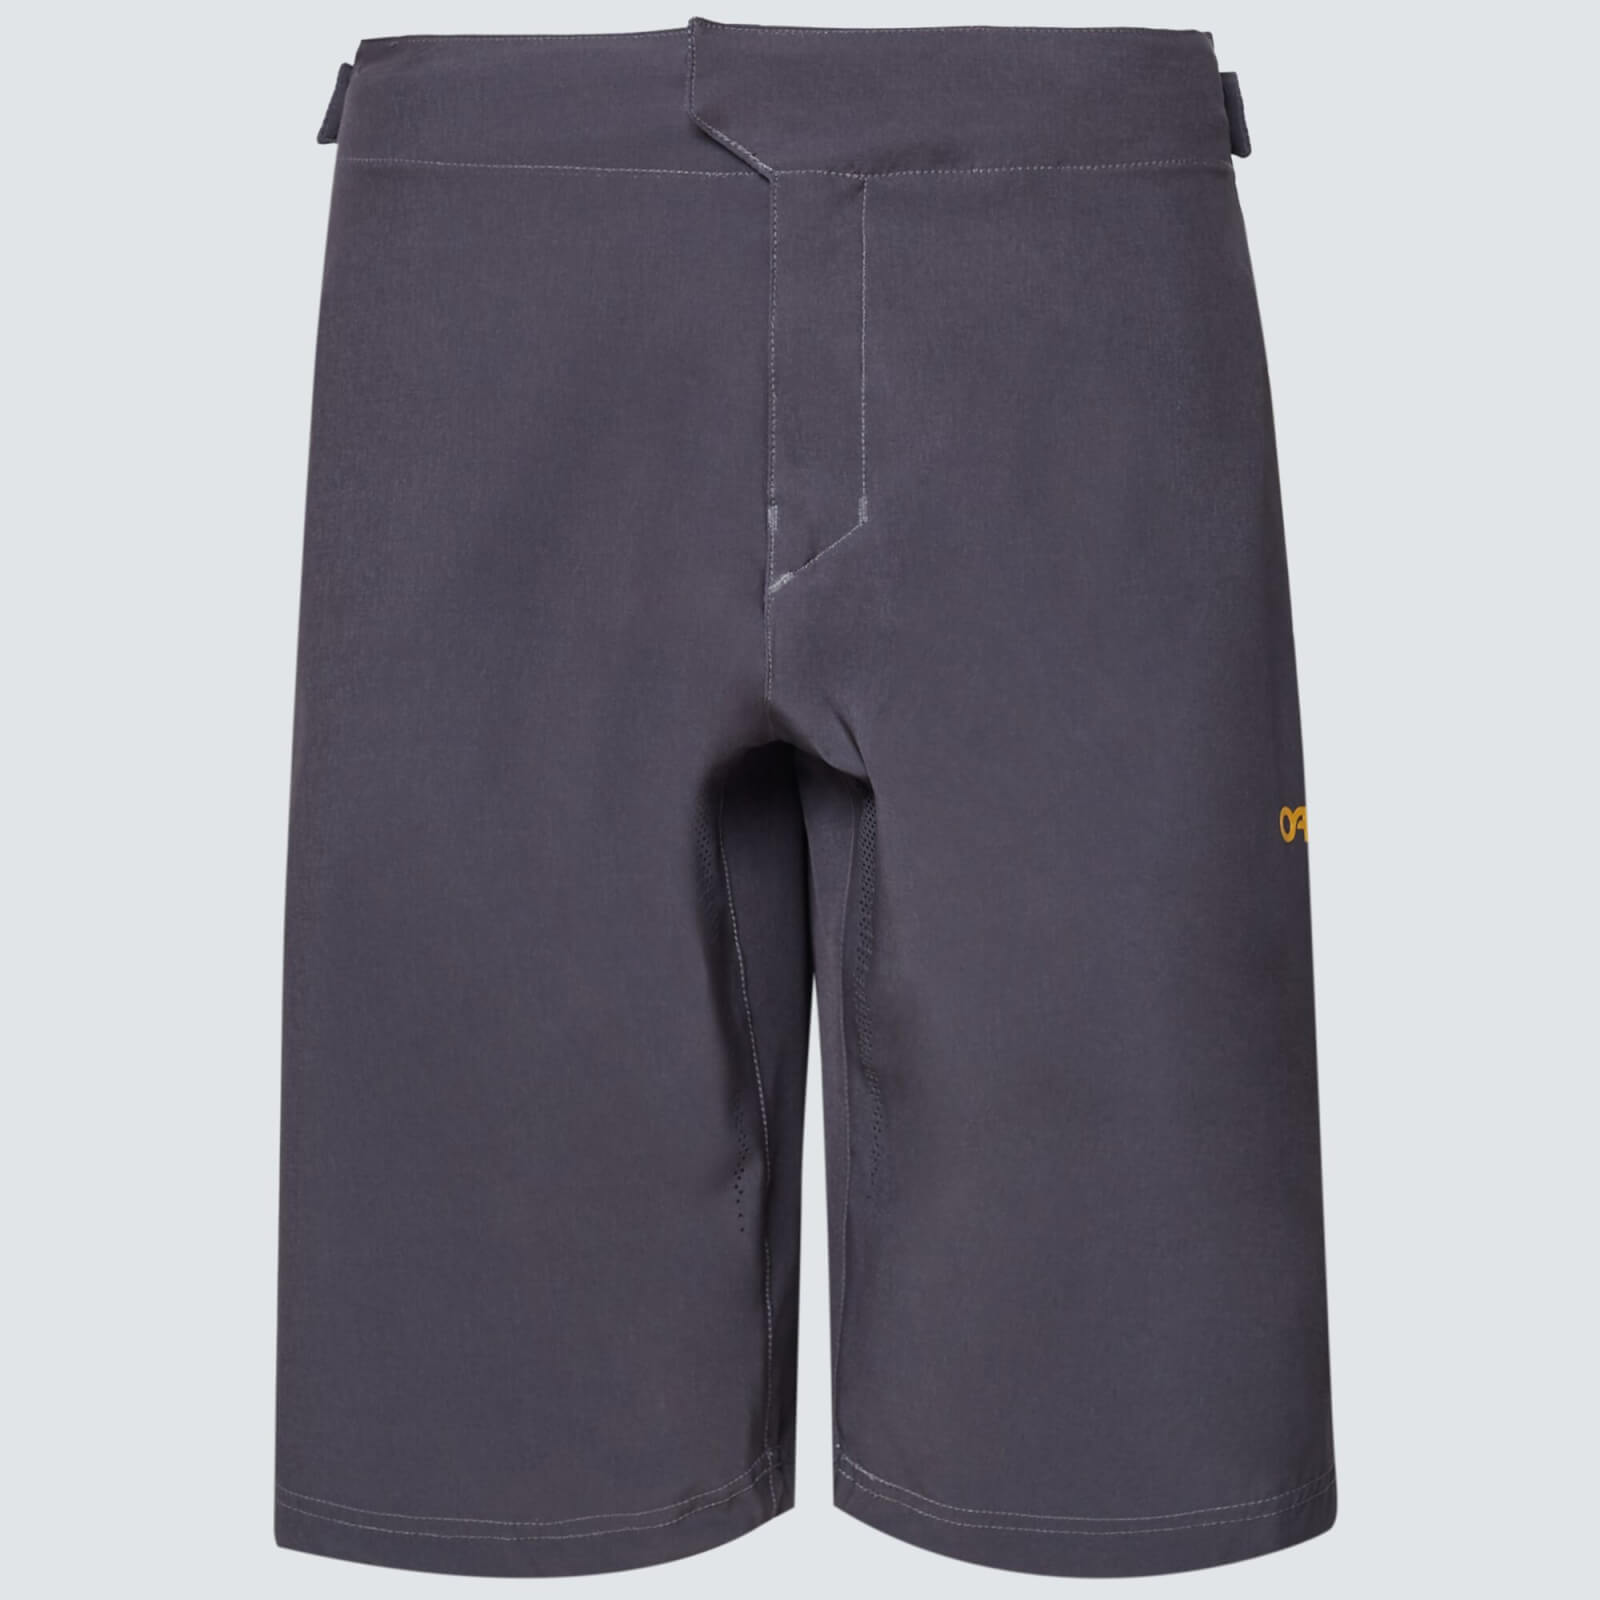 Oakley Reduct Berm Shorts - 30 - Forged Iron